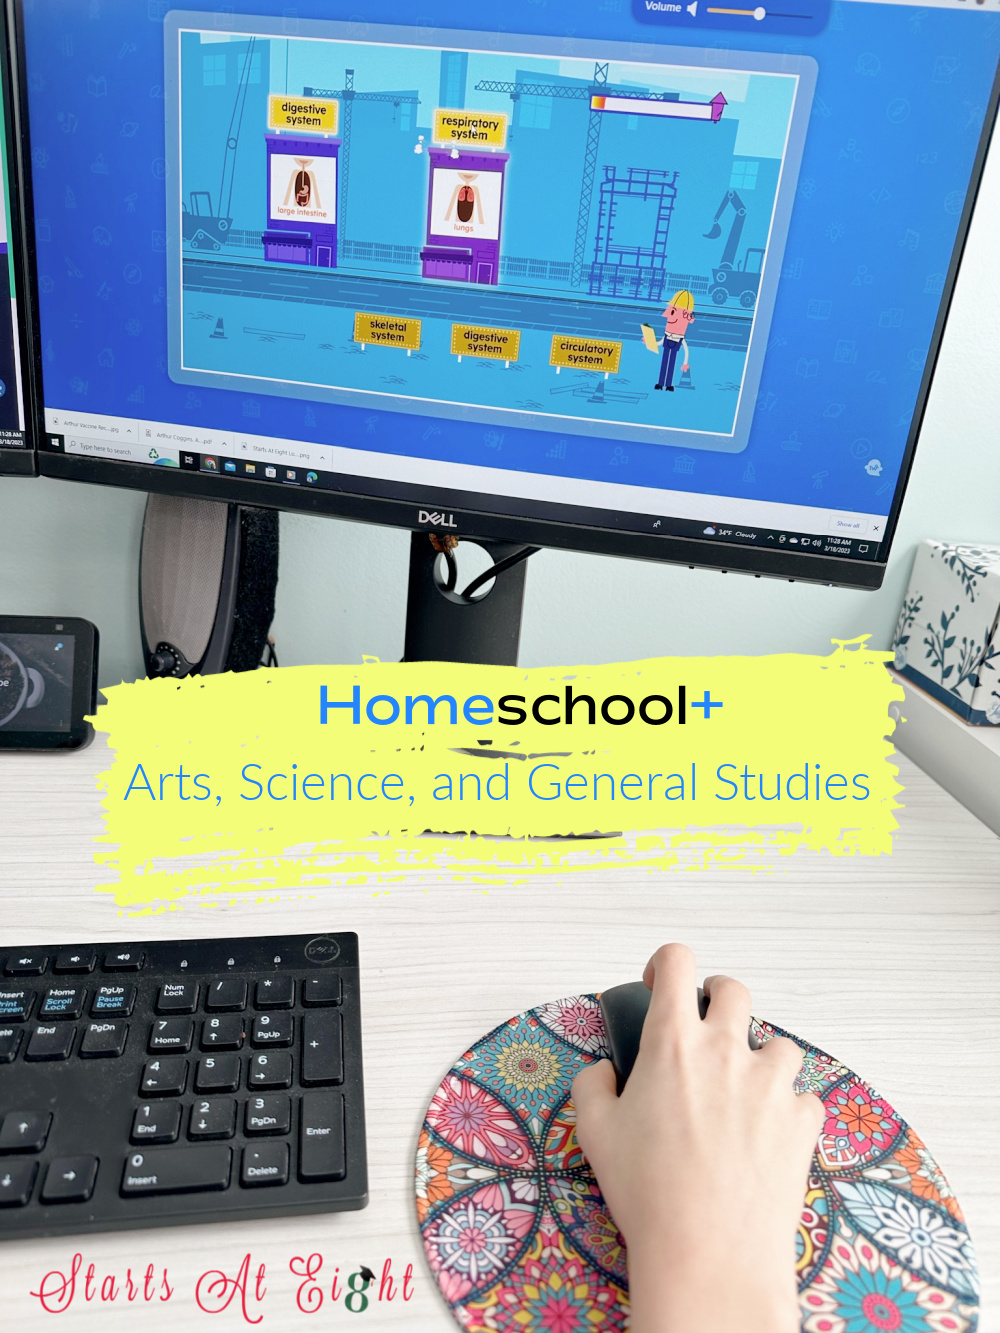 Homeschool+ also offers arts, science, and general studies courses